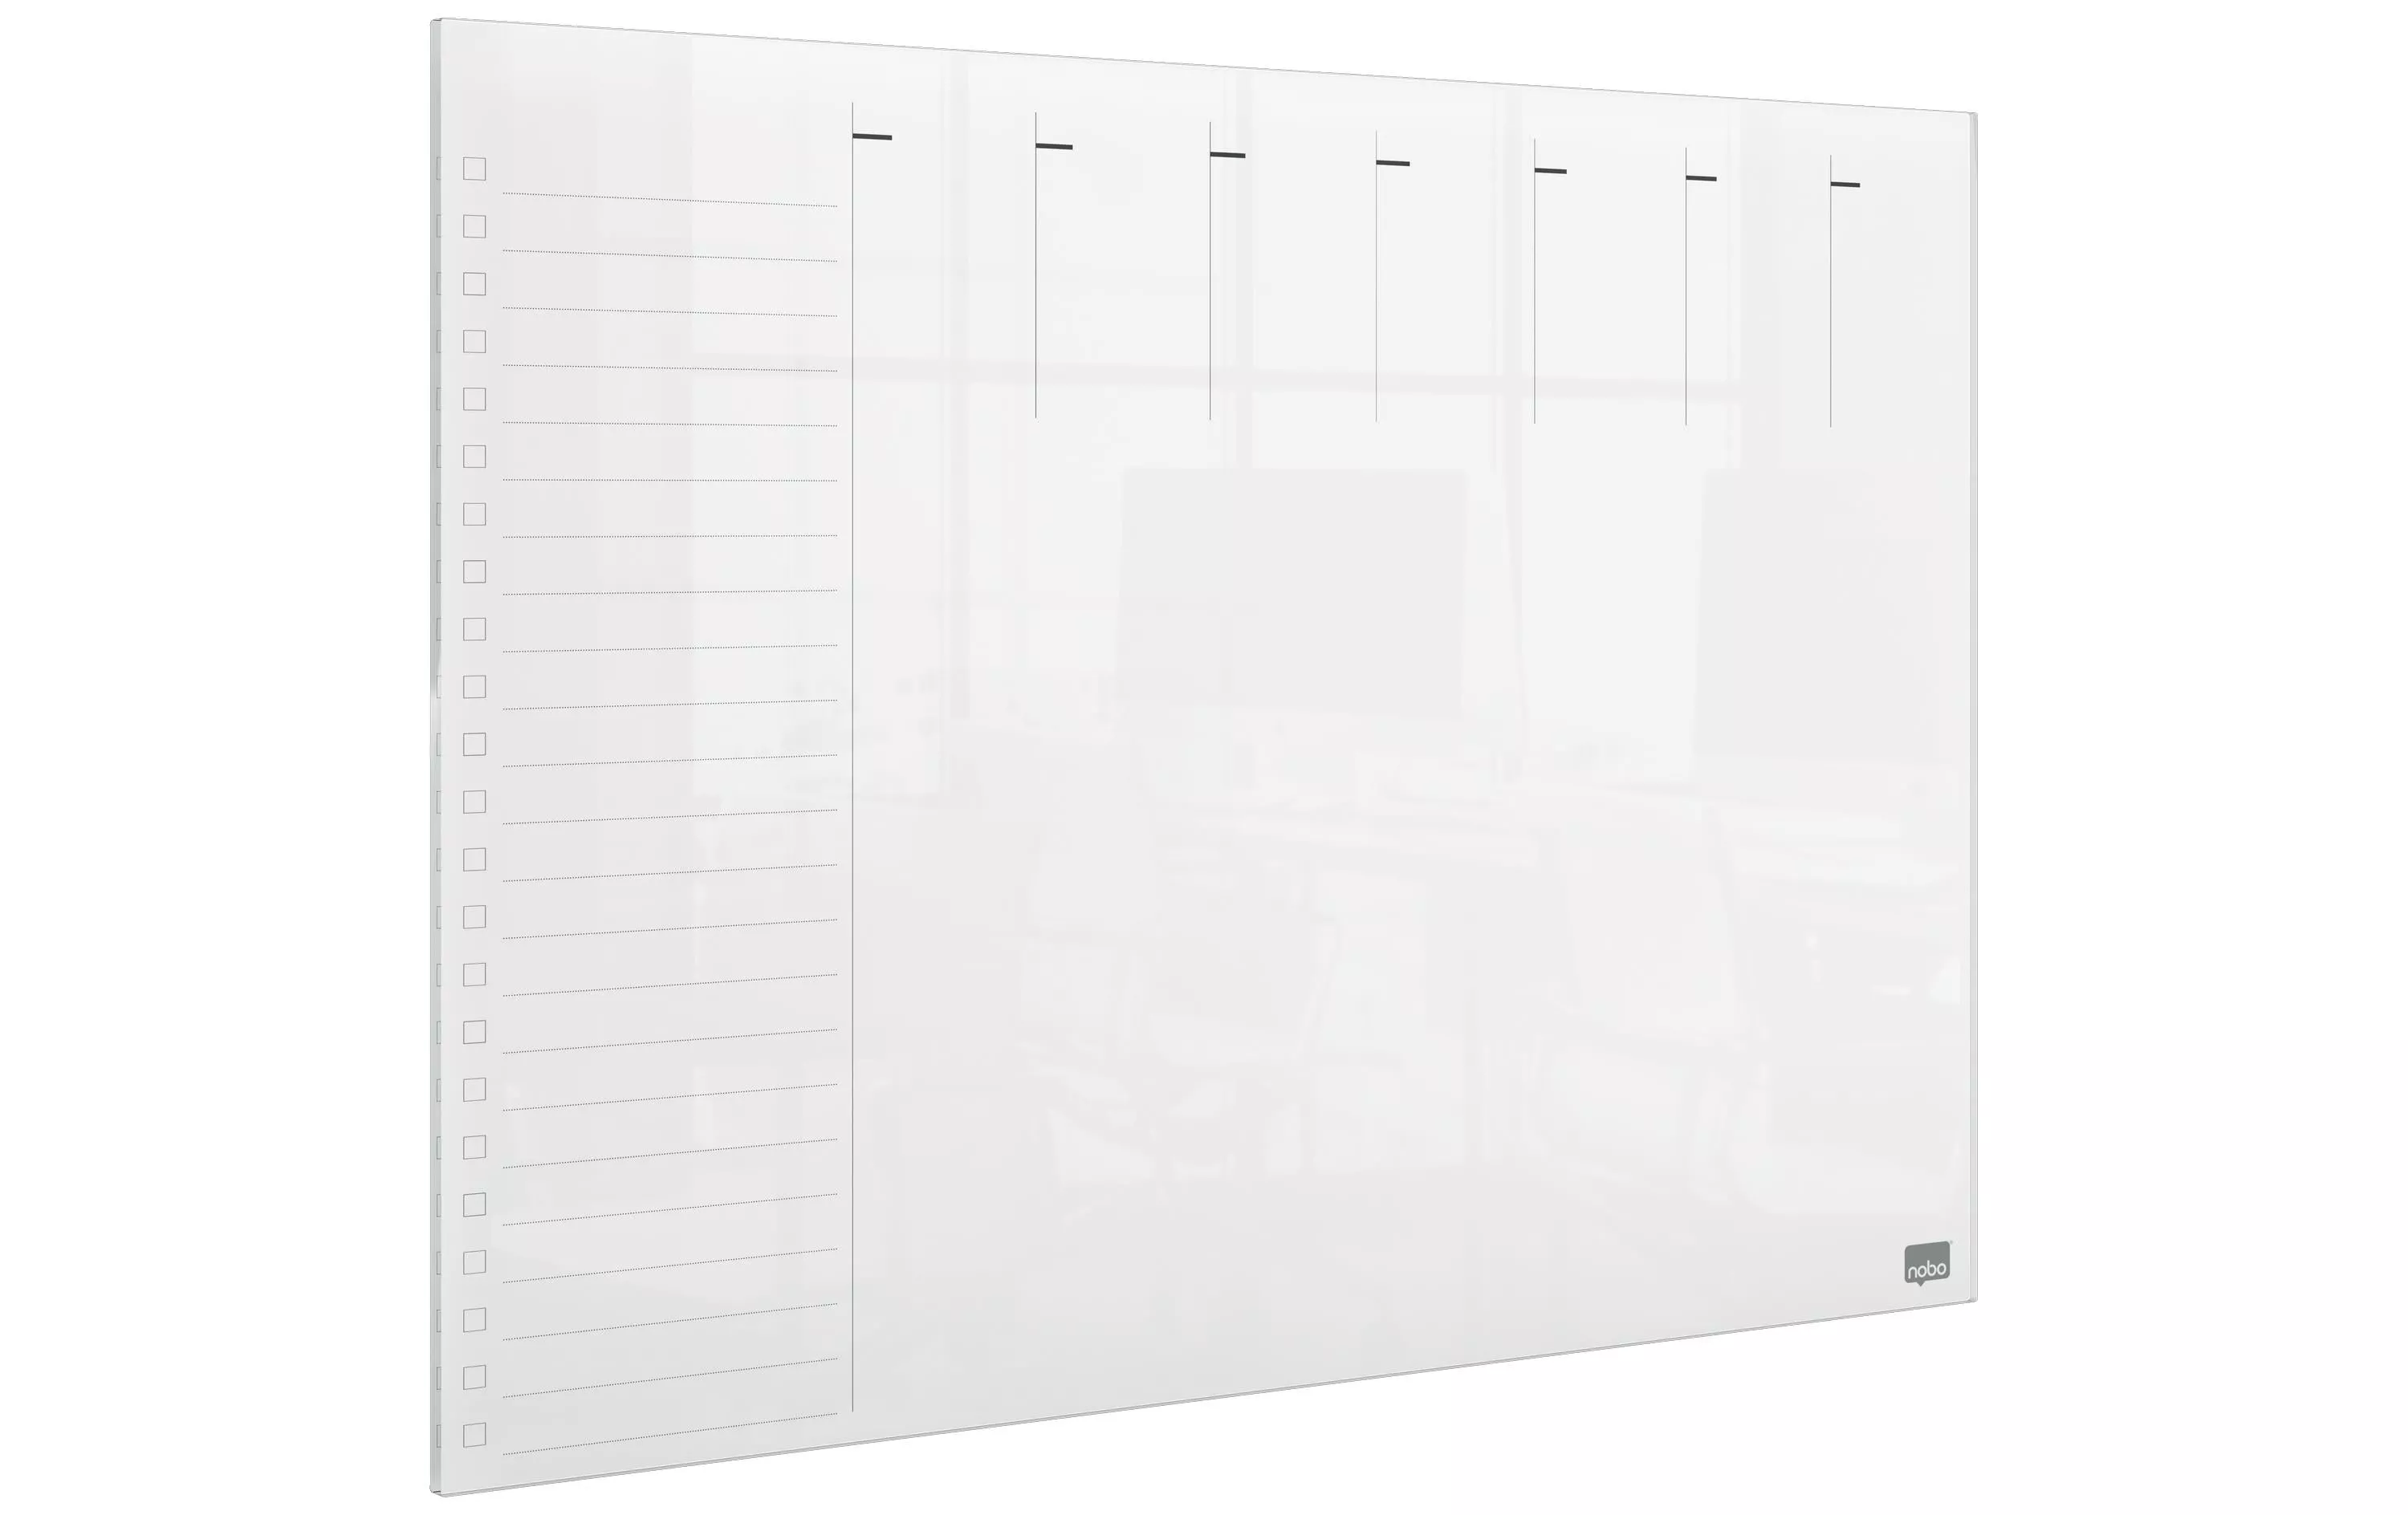 Acrylic Noteboard Weekly Planner A3, trasparente